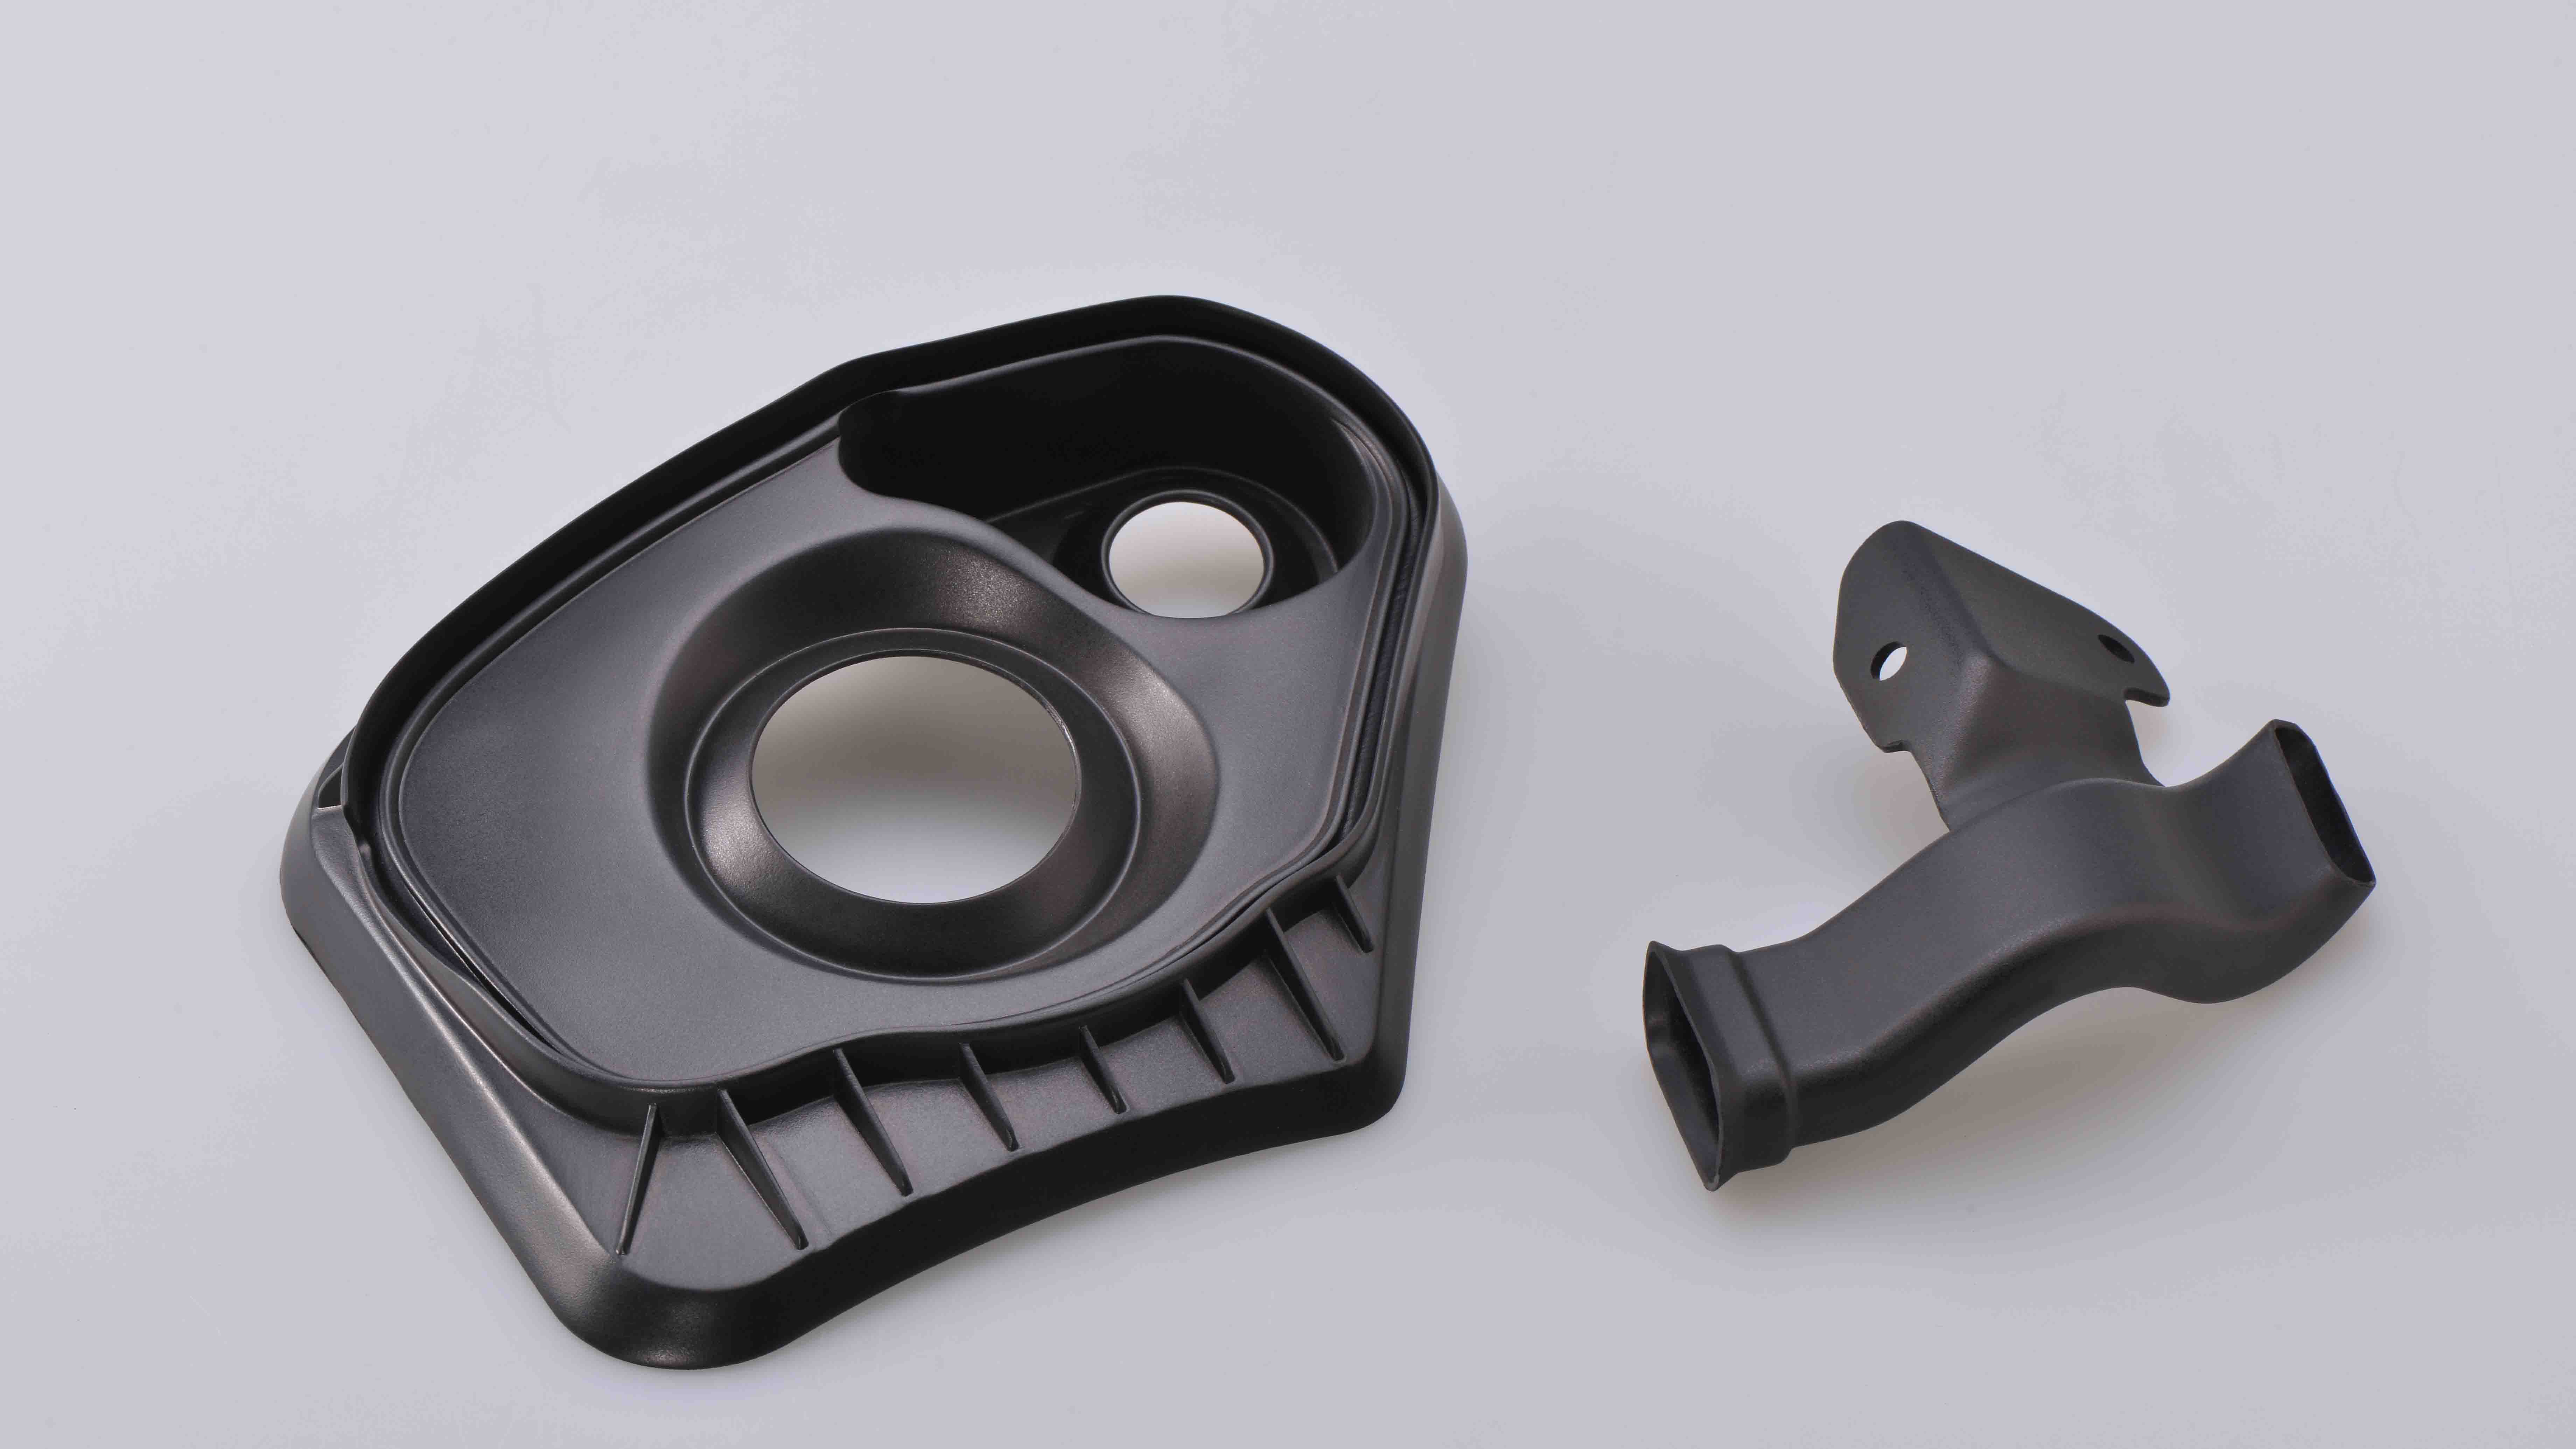 Tighter Tolerance Requirements Promote Micro Molding Technology Innovation